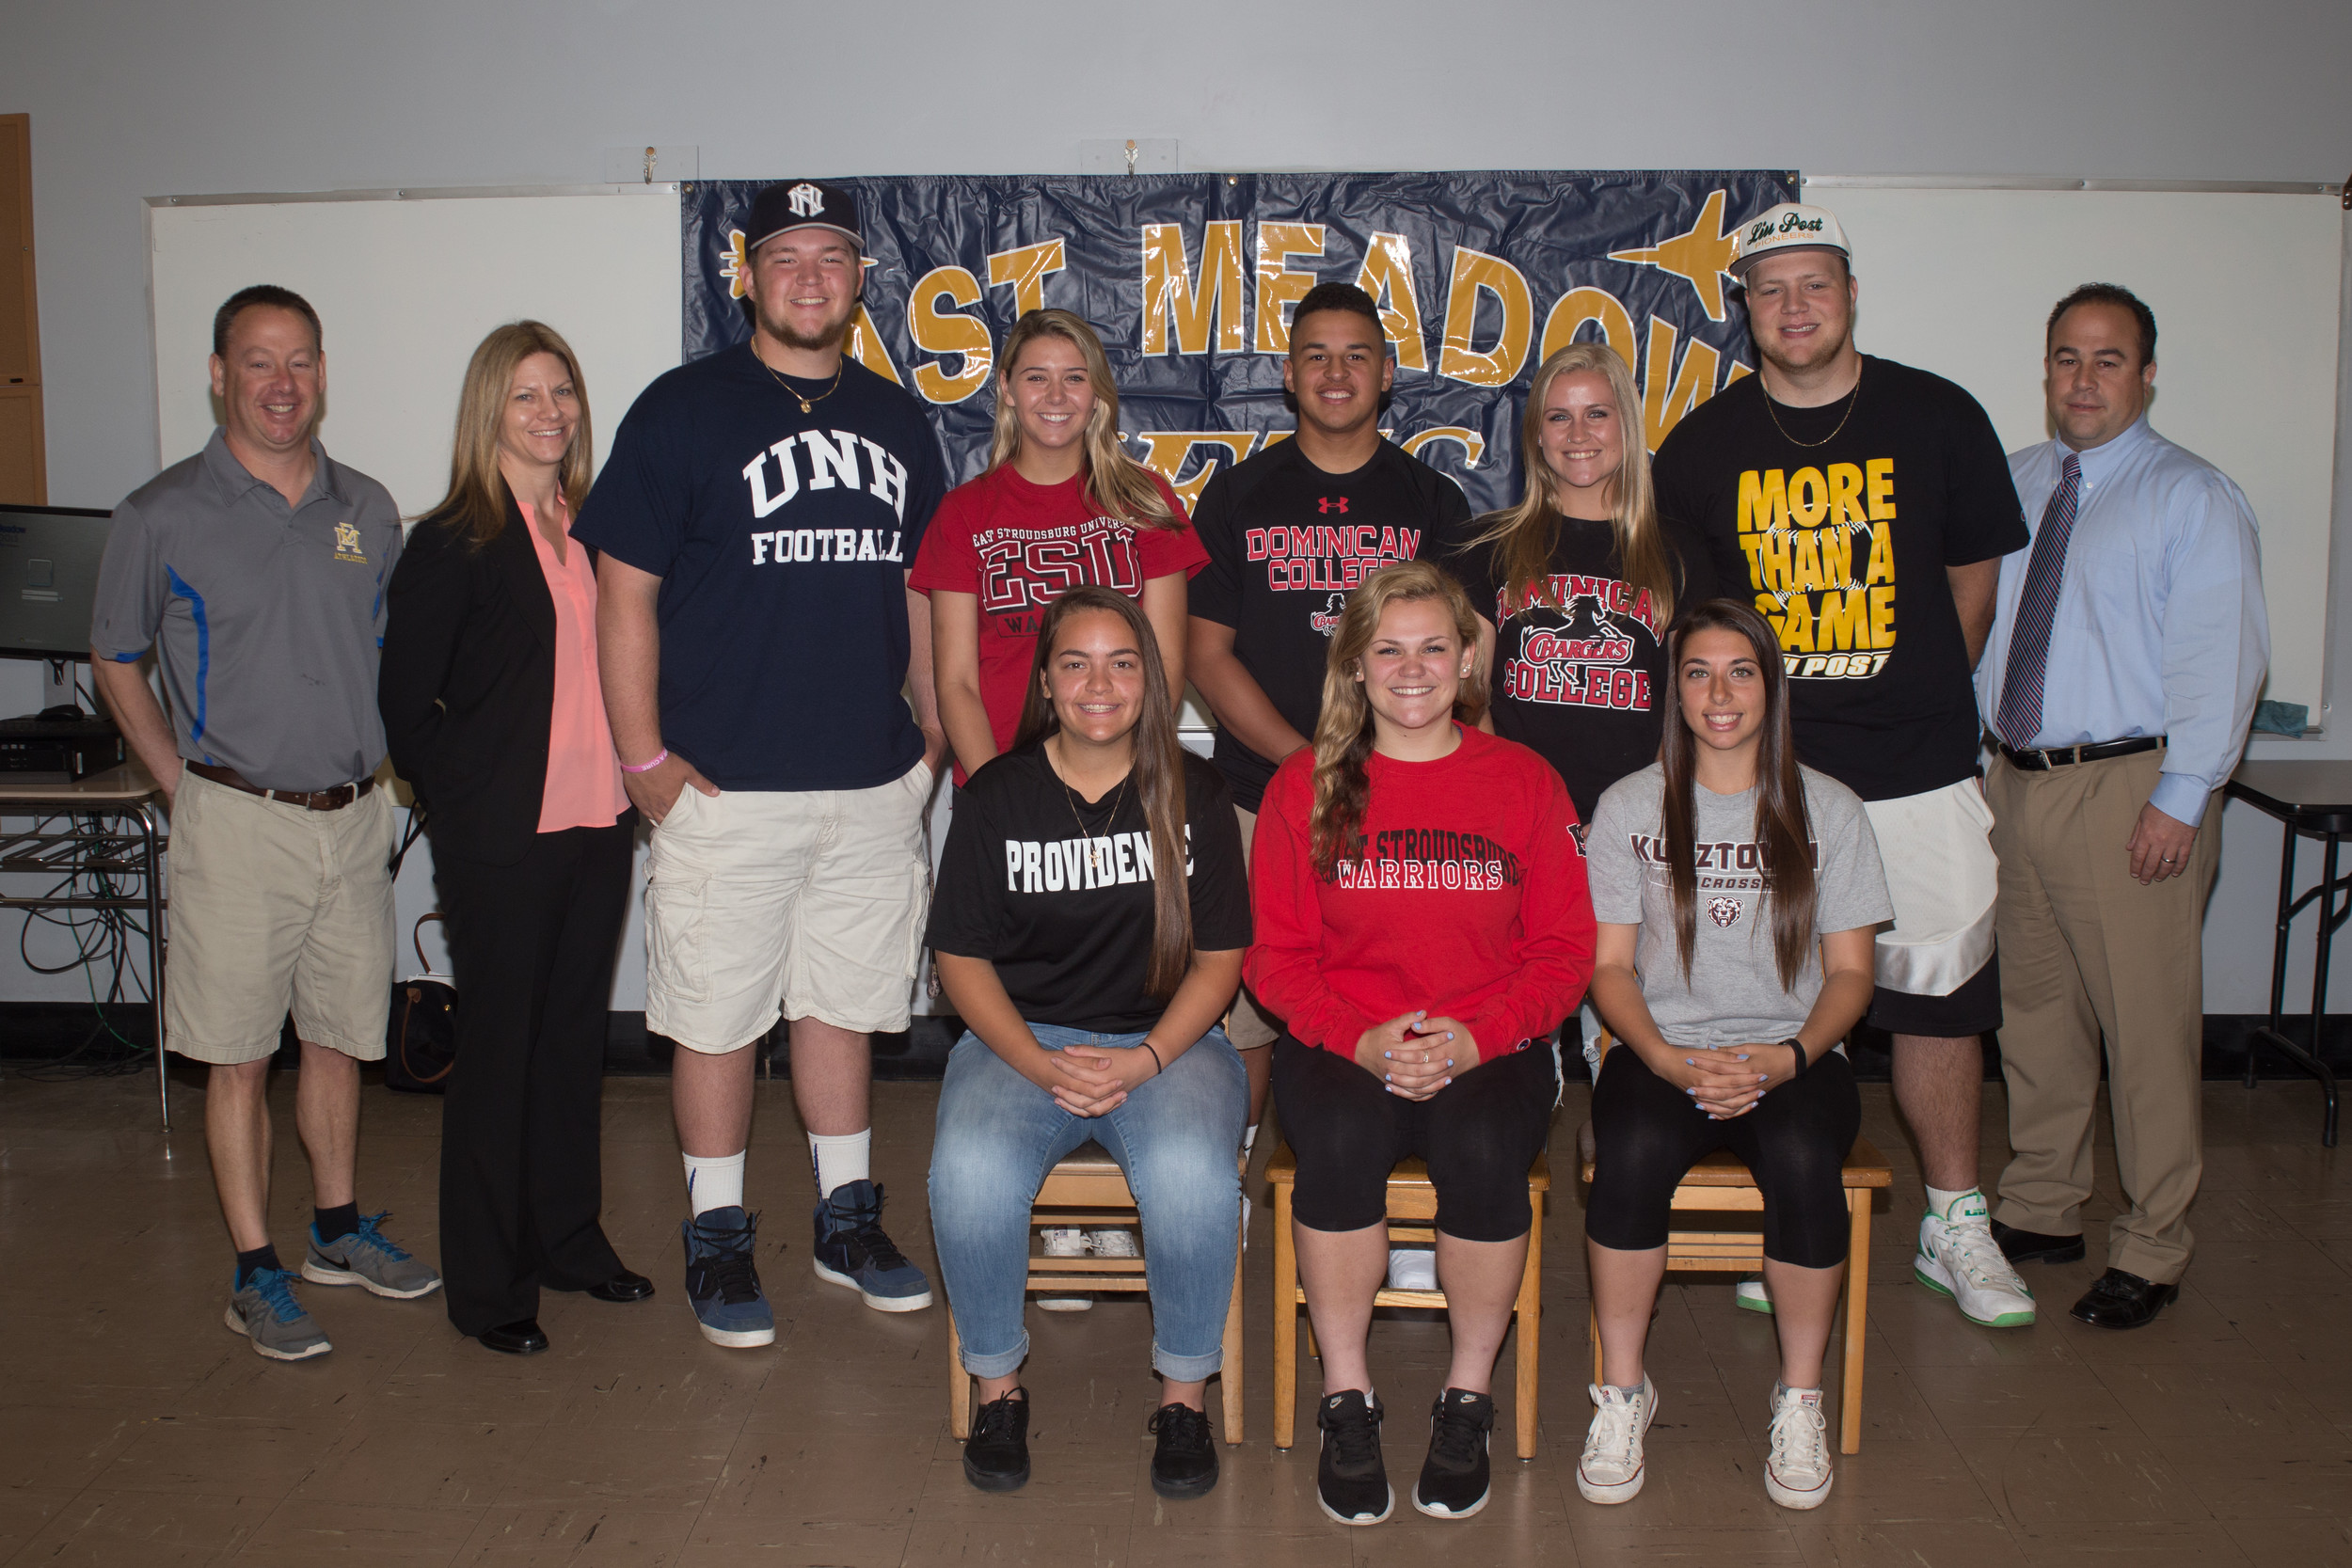 During East Meadow High School’s senior athlete commitment ceremony, eight students took the next step in their academic journeys as they announced their college plans.